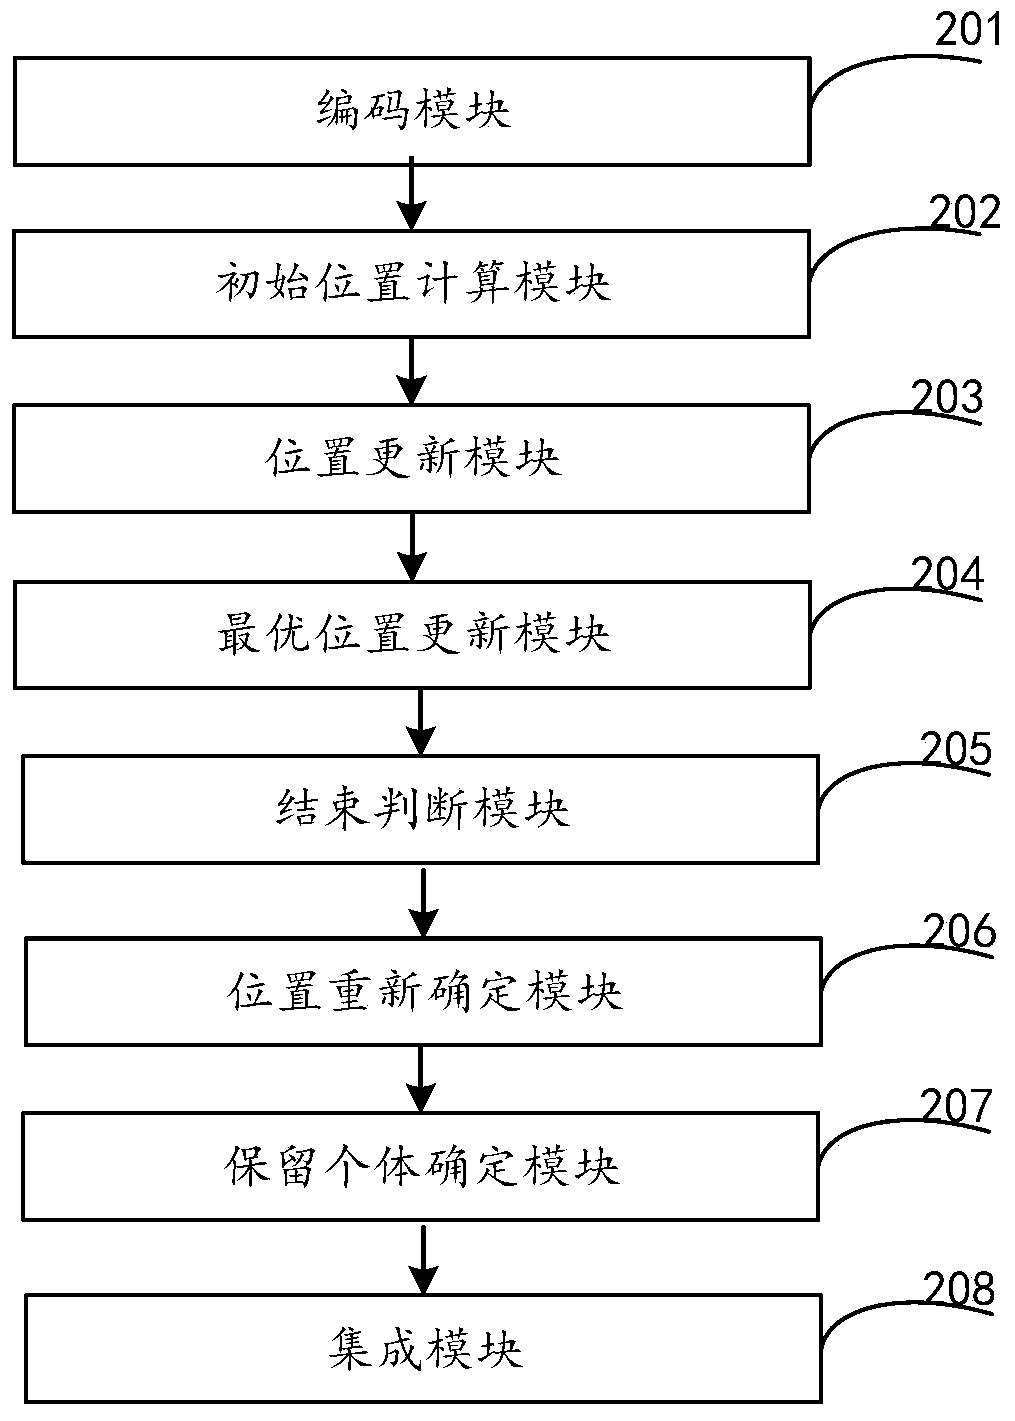 Method and system for optimizing extreme learning machine integrated learning based on lion group algorithm